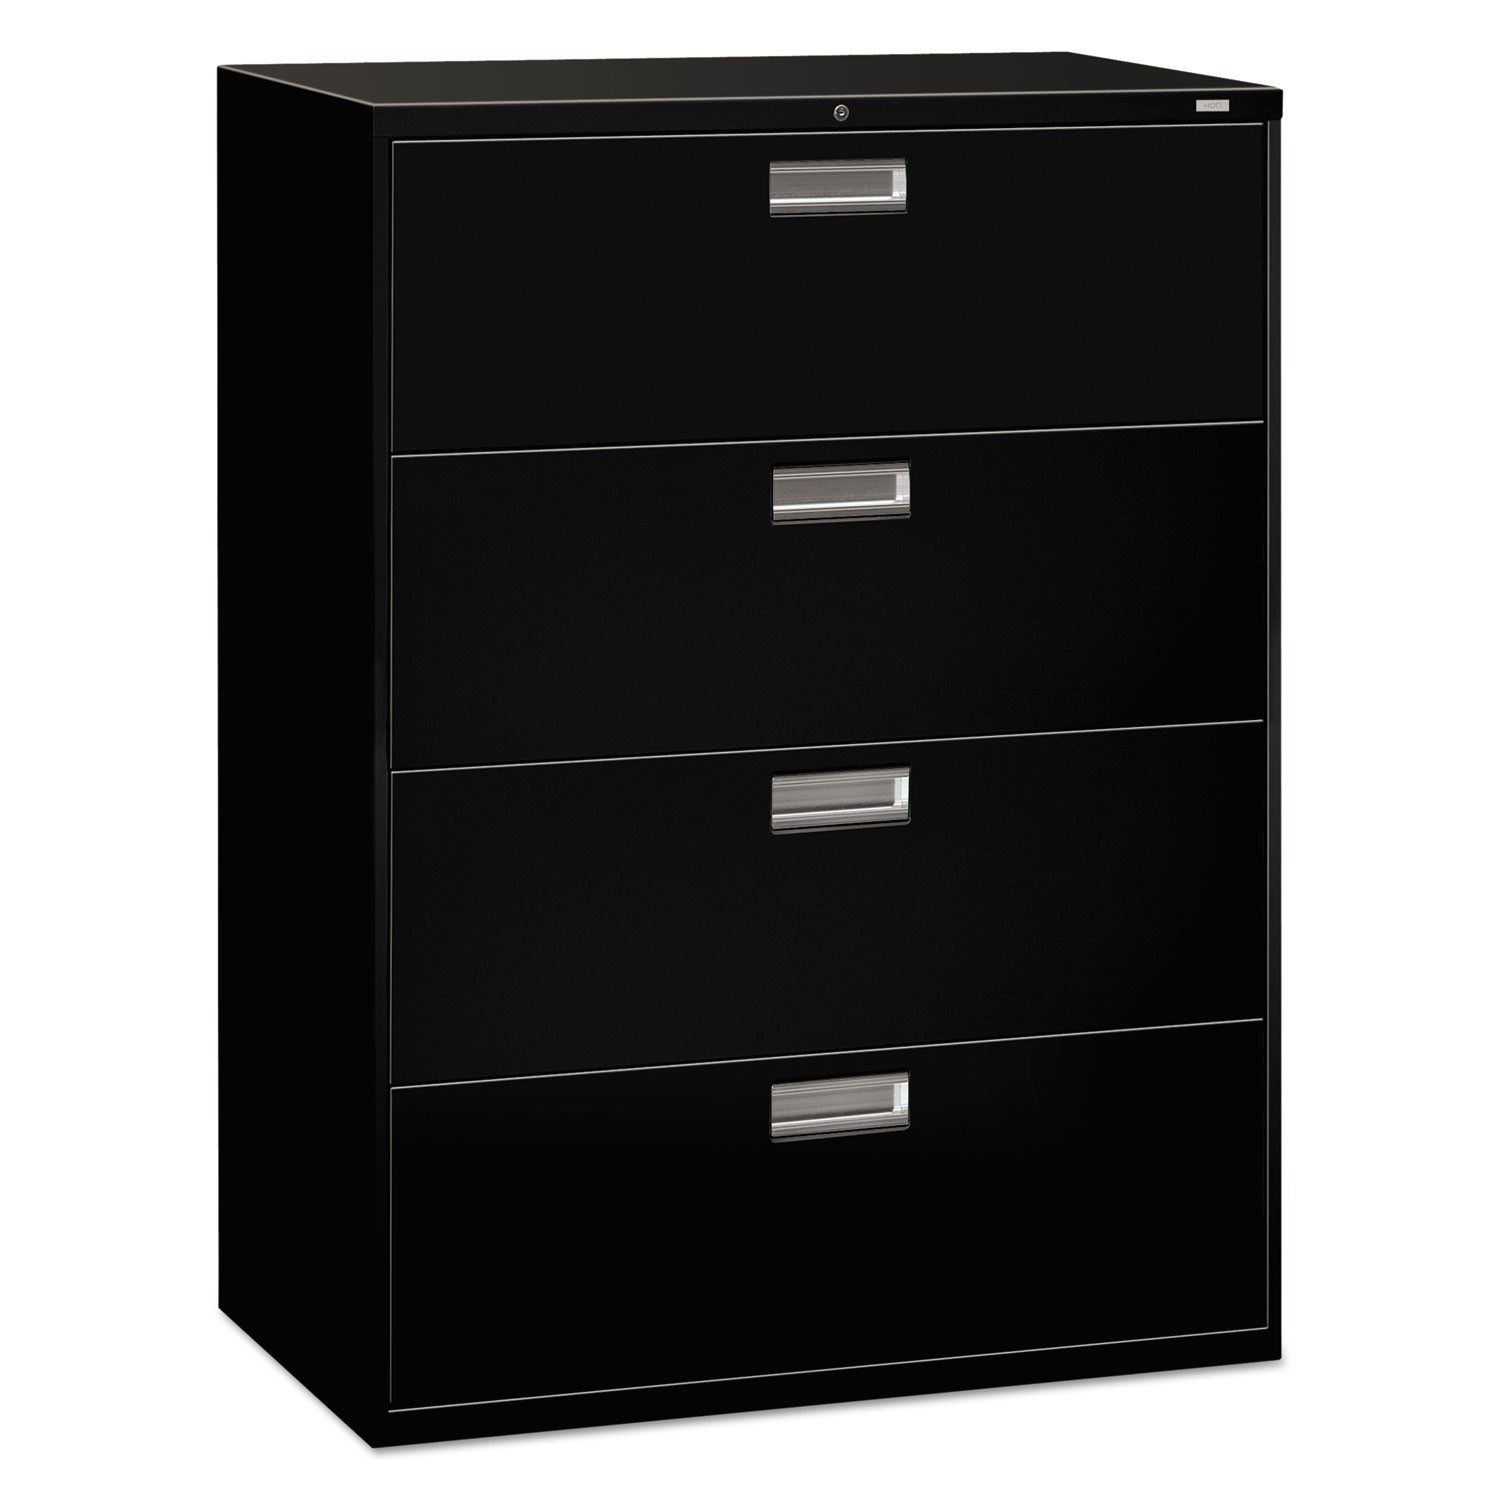 Brigade 600 Series Lateral File, 4 Legal/Letter-Size File Drawers, Black, 42" x 18" x 52.5 - 